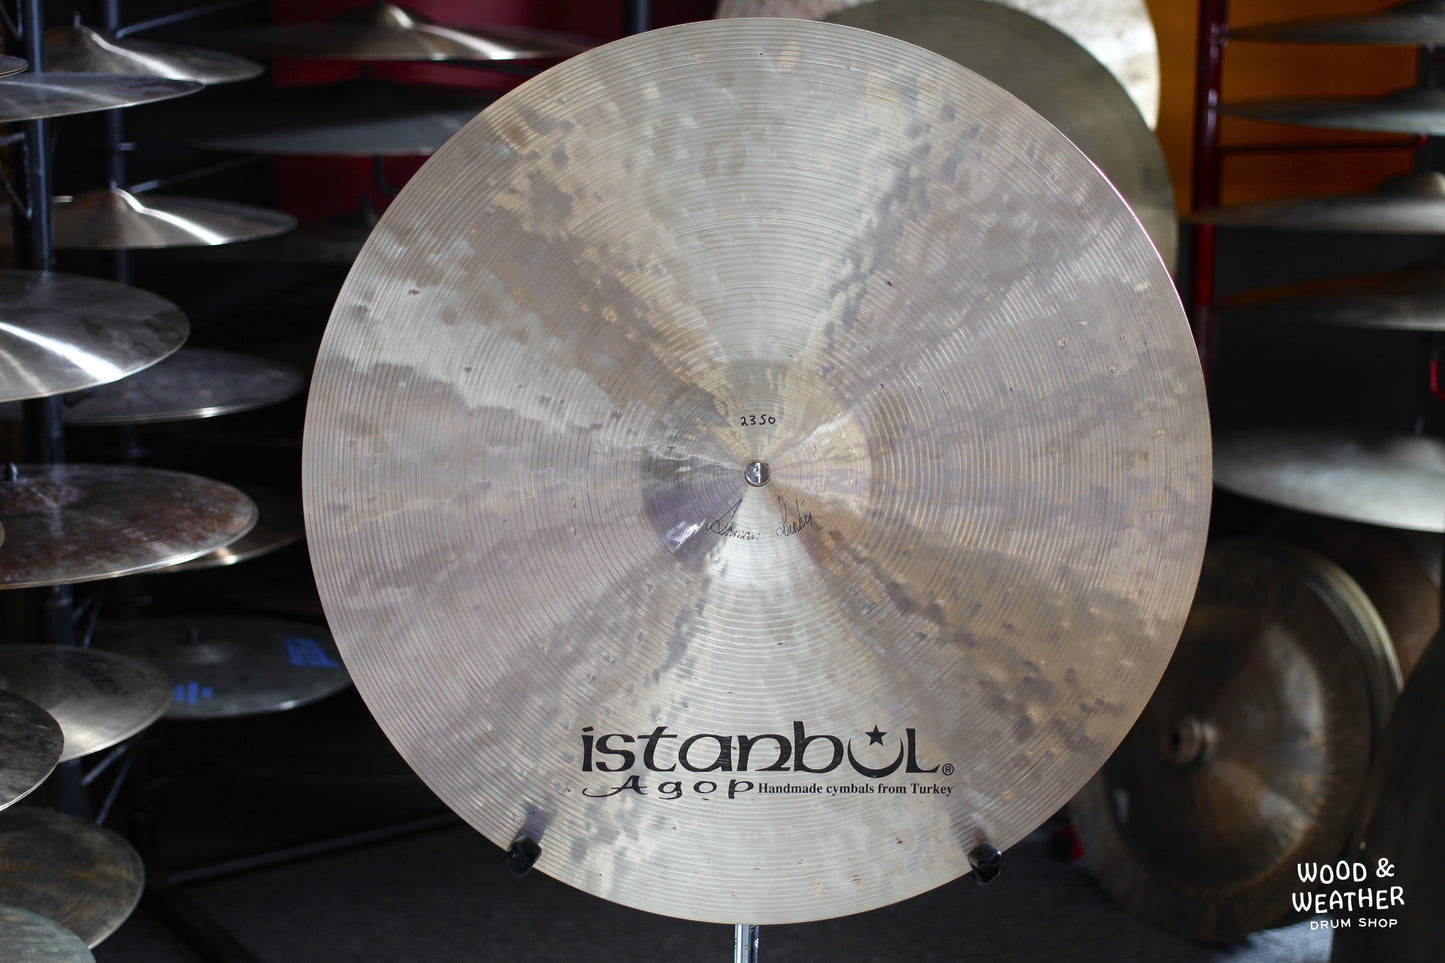 Istanbul Agop 22" Traditional Jazz Ride Cymbal 2350g